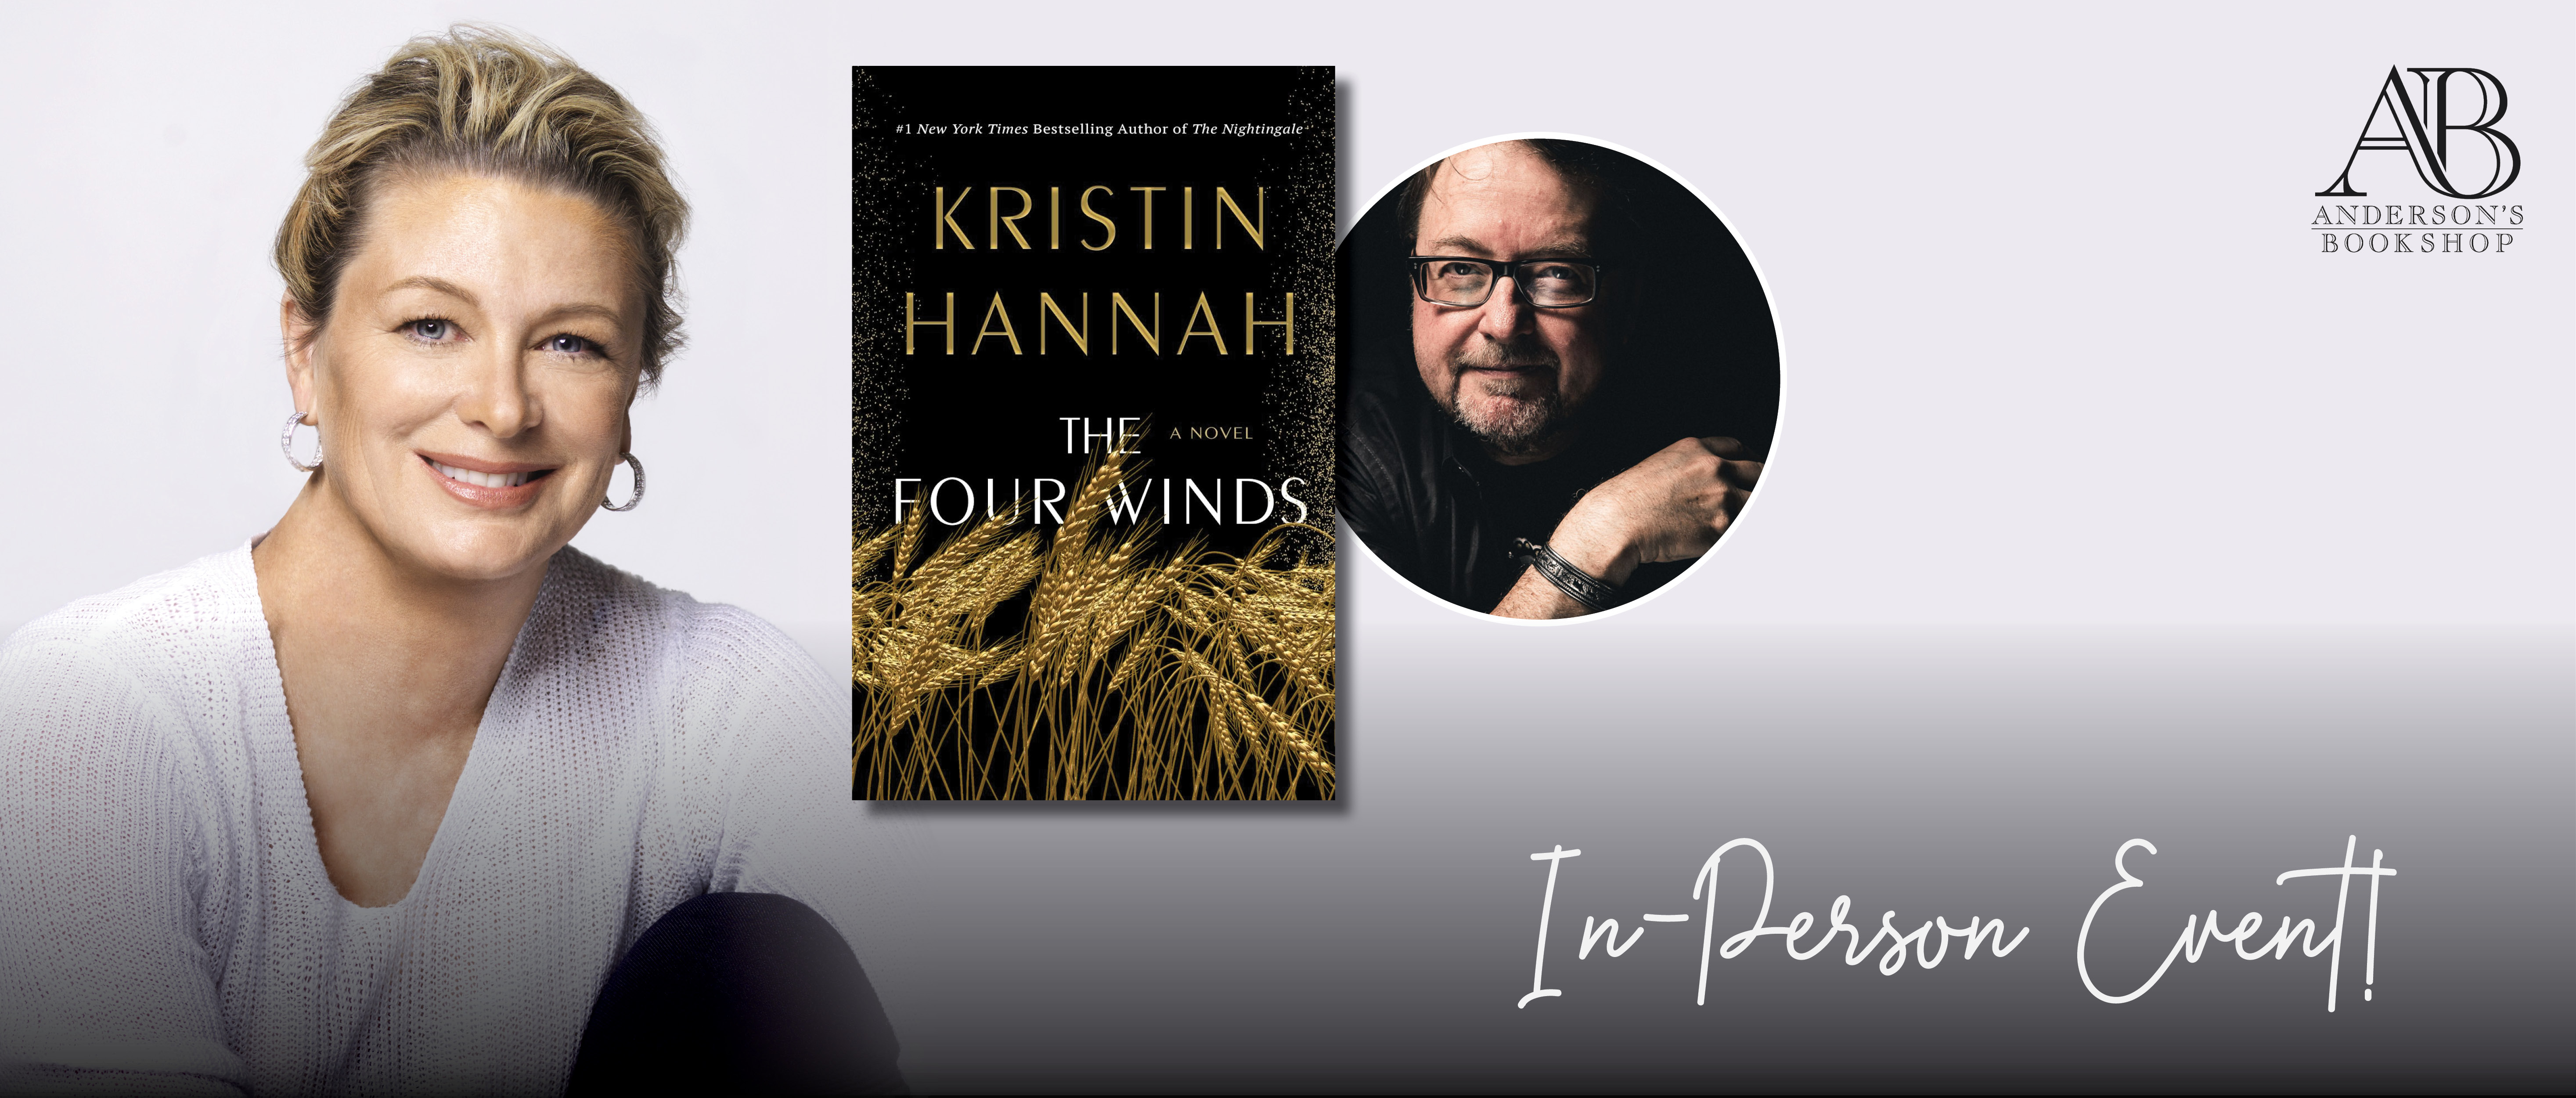 Author Event with Kristin Hannah/The Four Winds